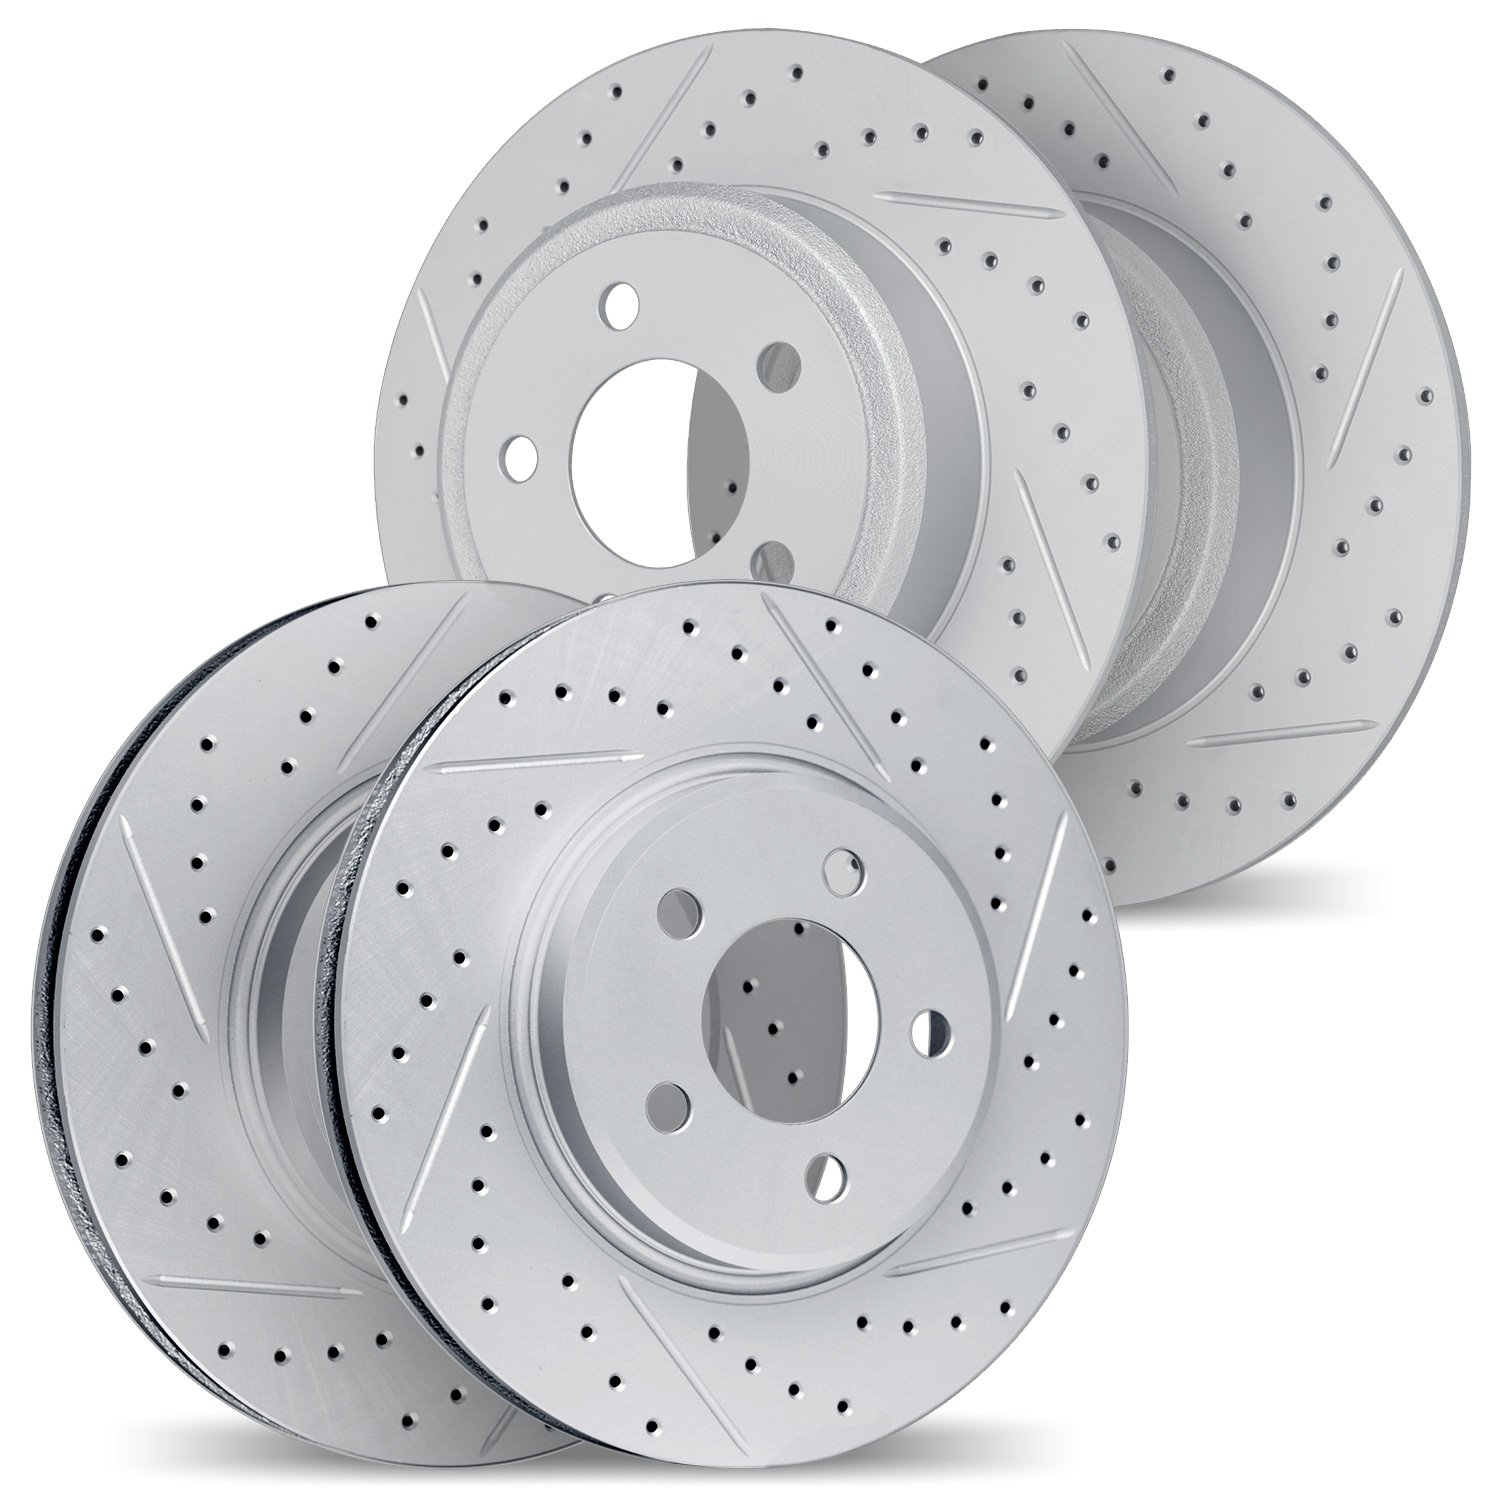 2004-21014 Geoperformance Drilled/Slotted Brake Rotors, 2015-2019 Kia/Hyundai/Genesis, Position: Front and Rear